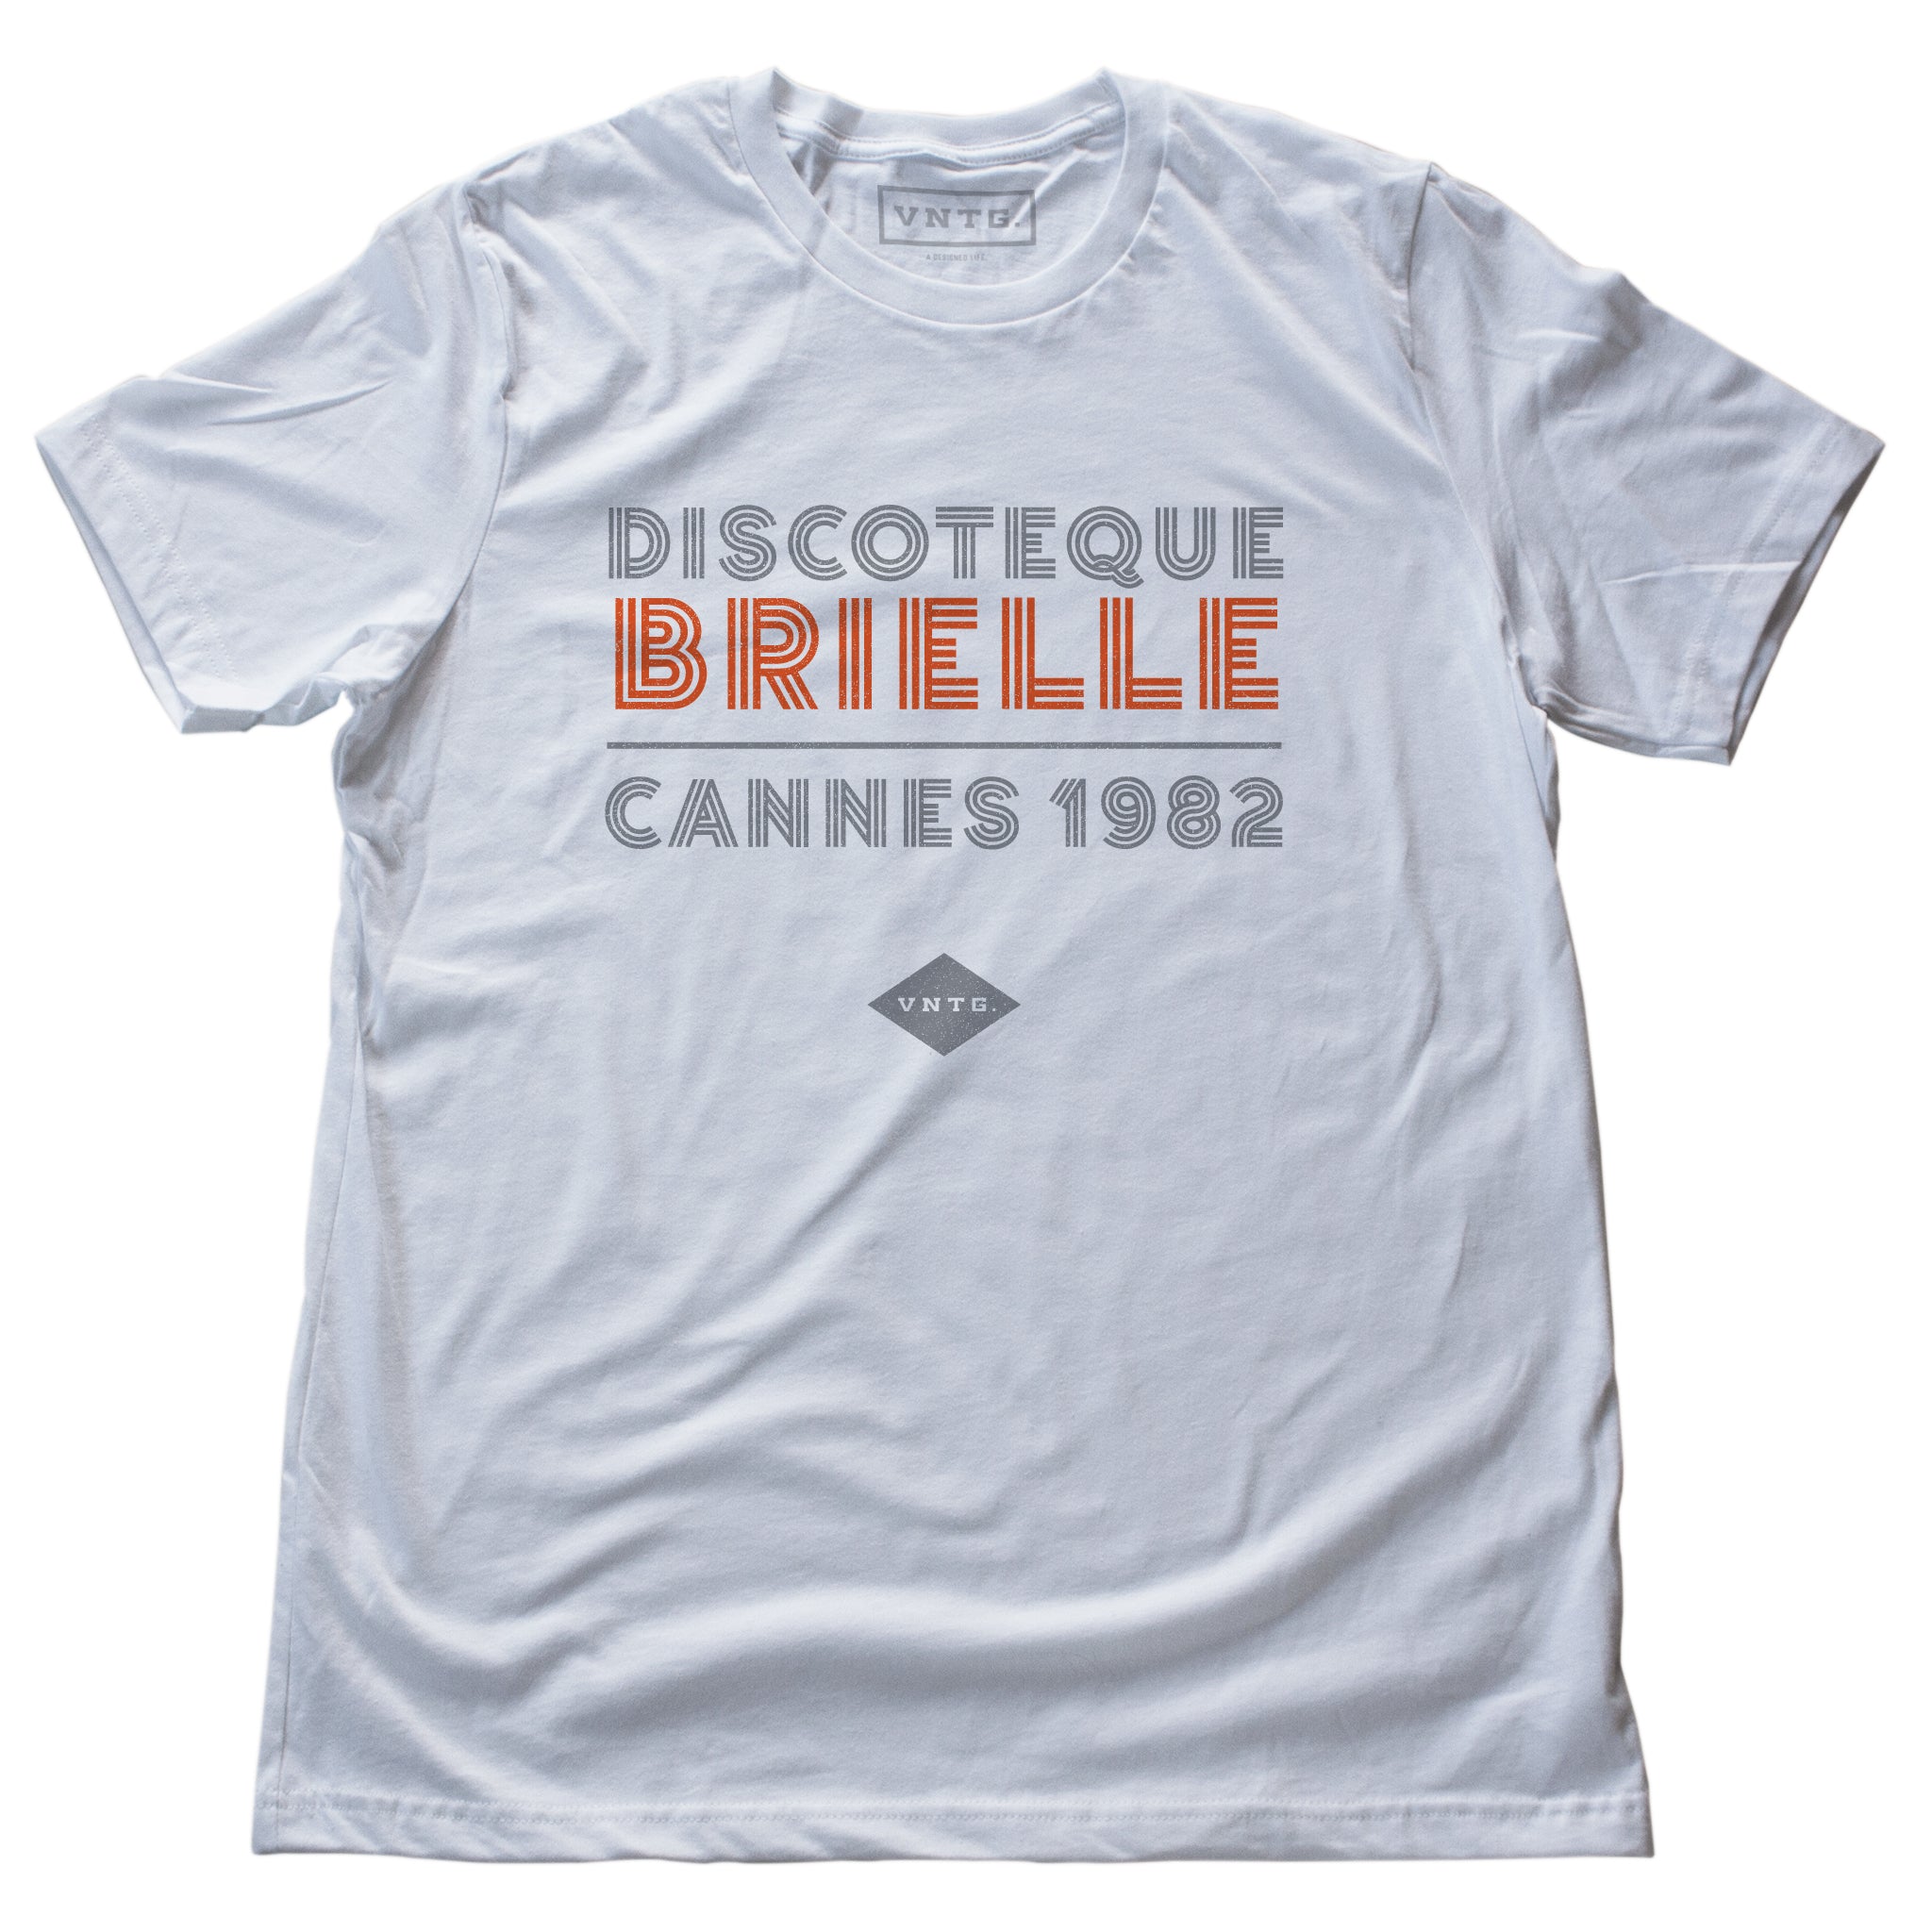 A fashionable classic white graphic tee, for a fictional Cannes, France disco from 1982. The retro typography reads “DISCOTEQUE BRIELLE / CANNES 1982” with the VNTG. diamond logo beneath. From Wolfsaint.net